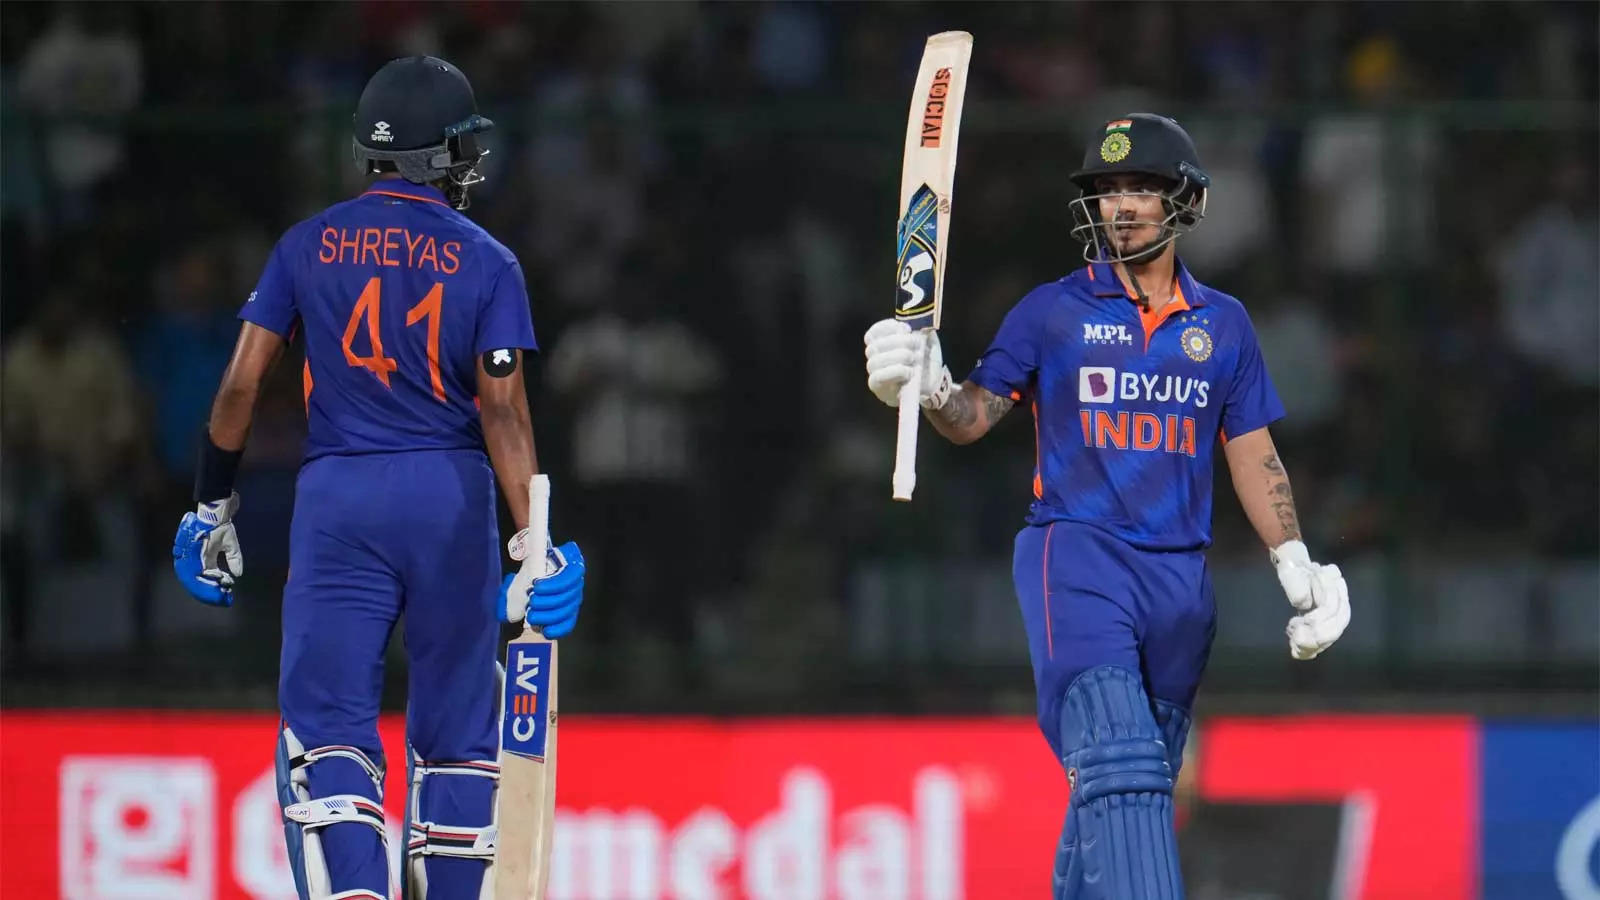 Ishan Kishan and Shreyas Iyer werent picked for Asia Cup 2022